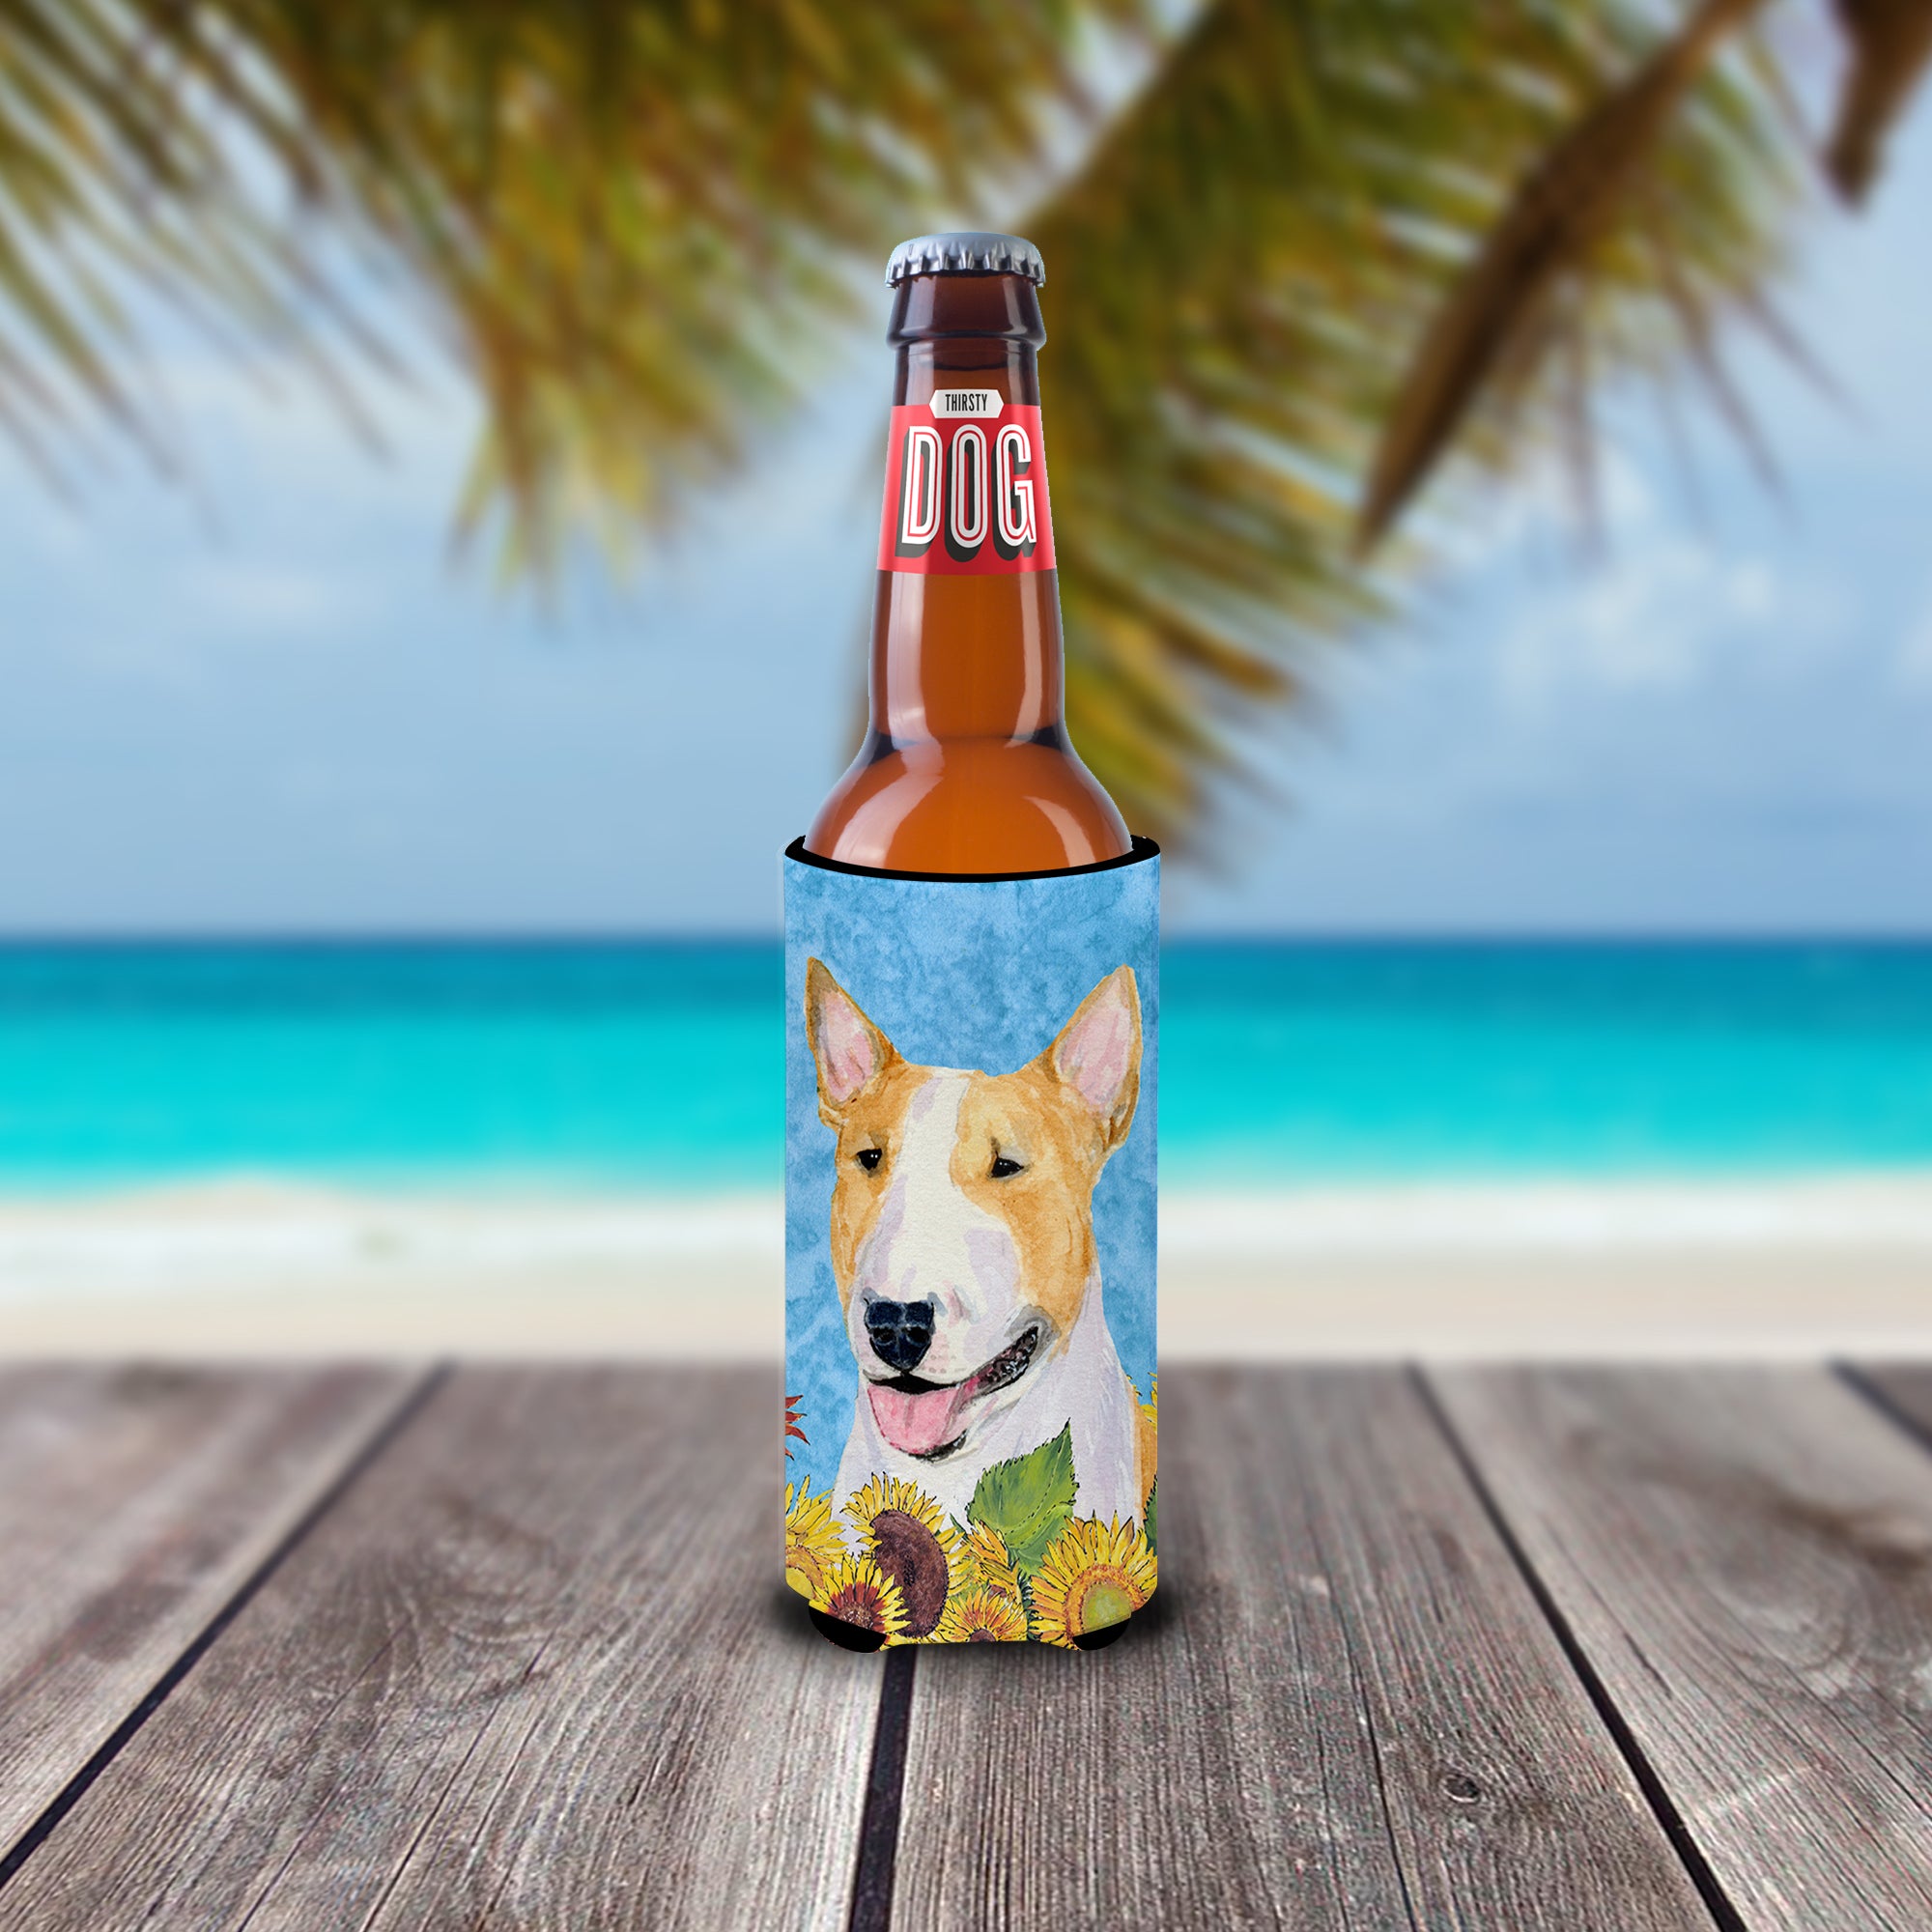 Bull Terrier in Summer Flowers Ultra Beverage Isolateurs pour canettes minces SS4129MUK